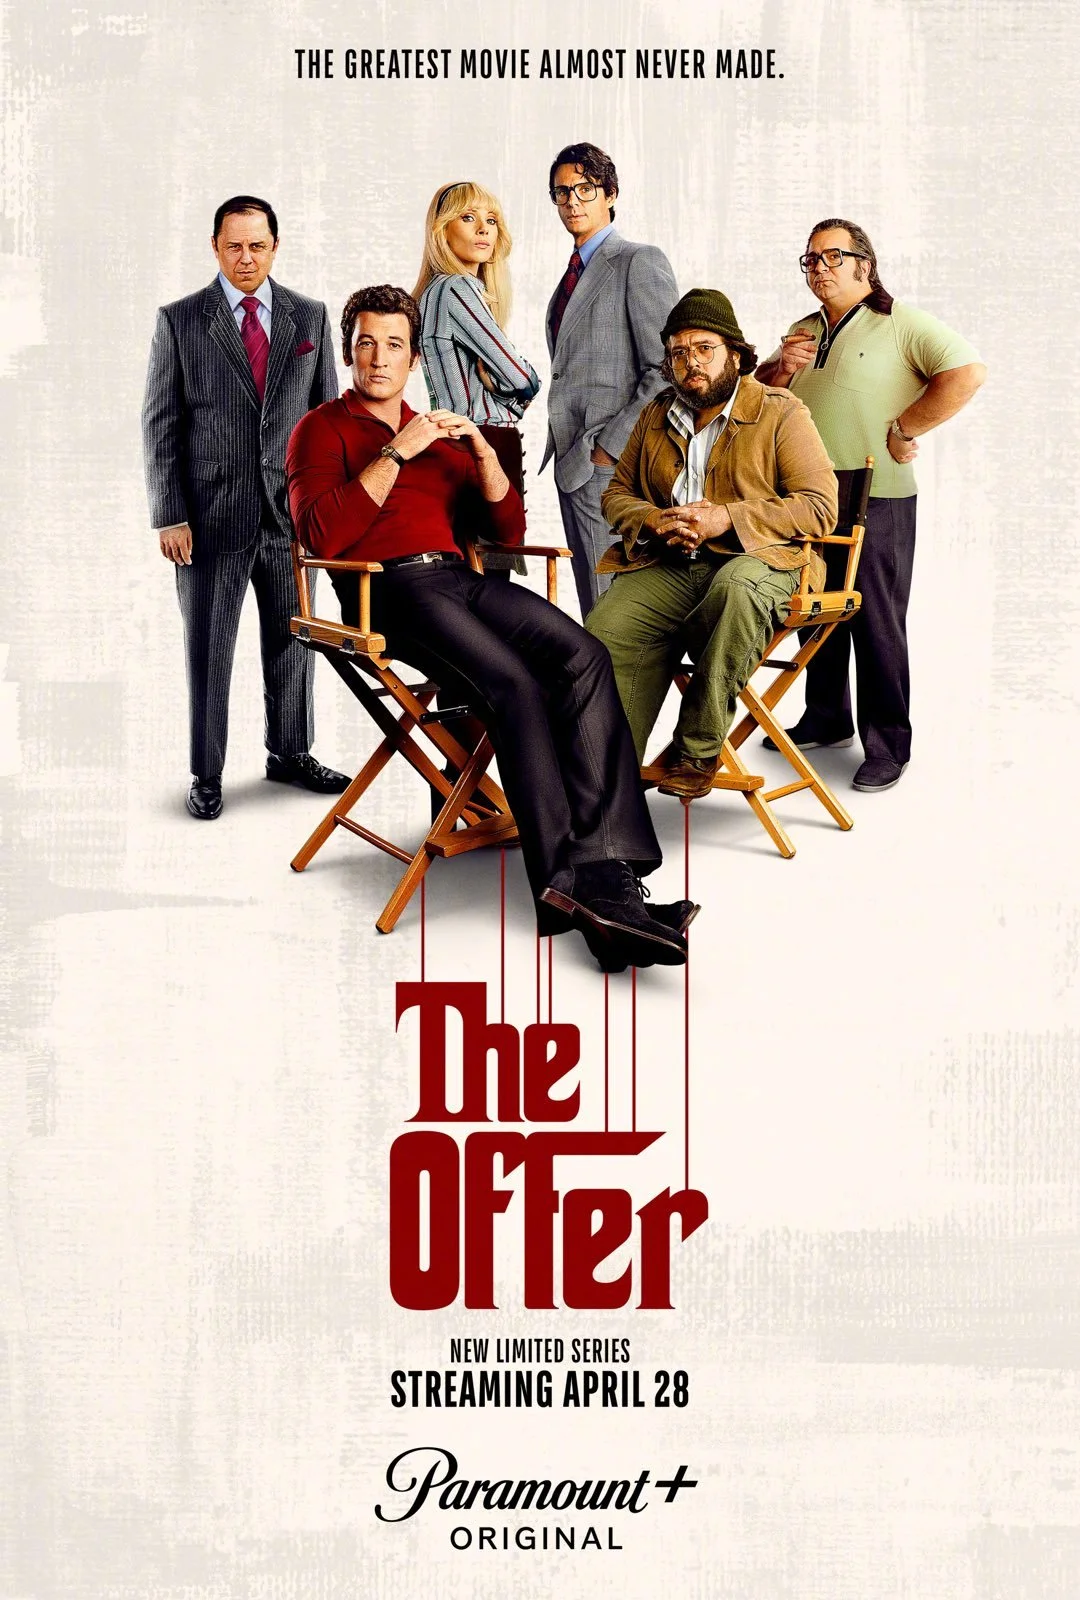 TV Shows "The Offer‎" Focusing Behind the Making of the Classic Movie "The Godfather" Released Official Trailer